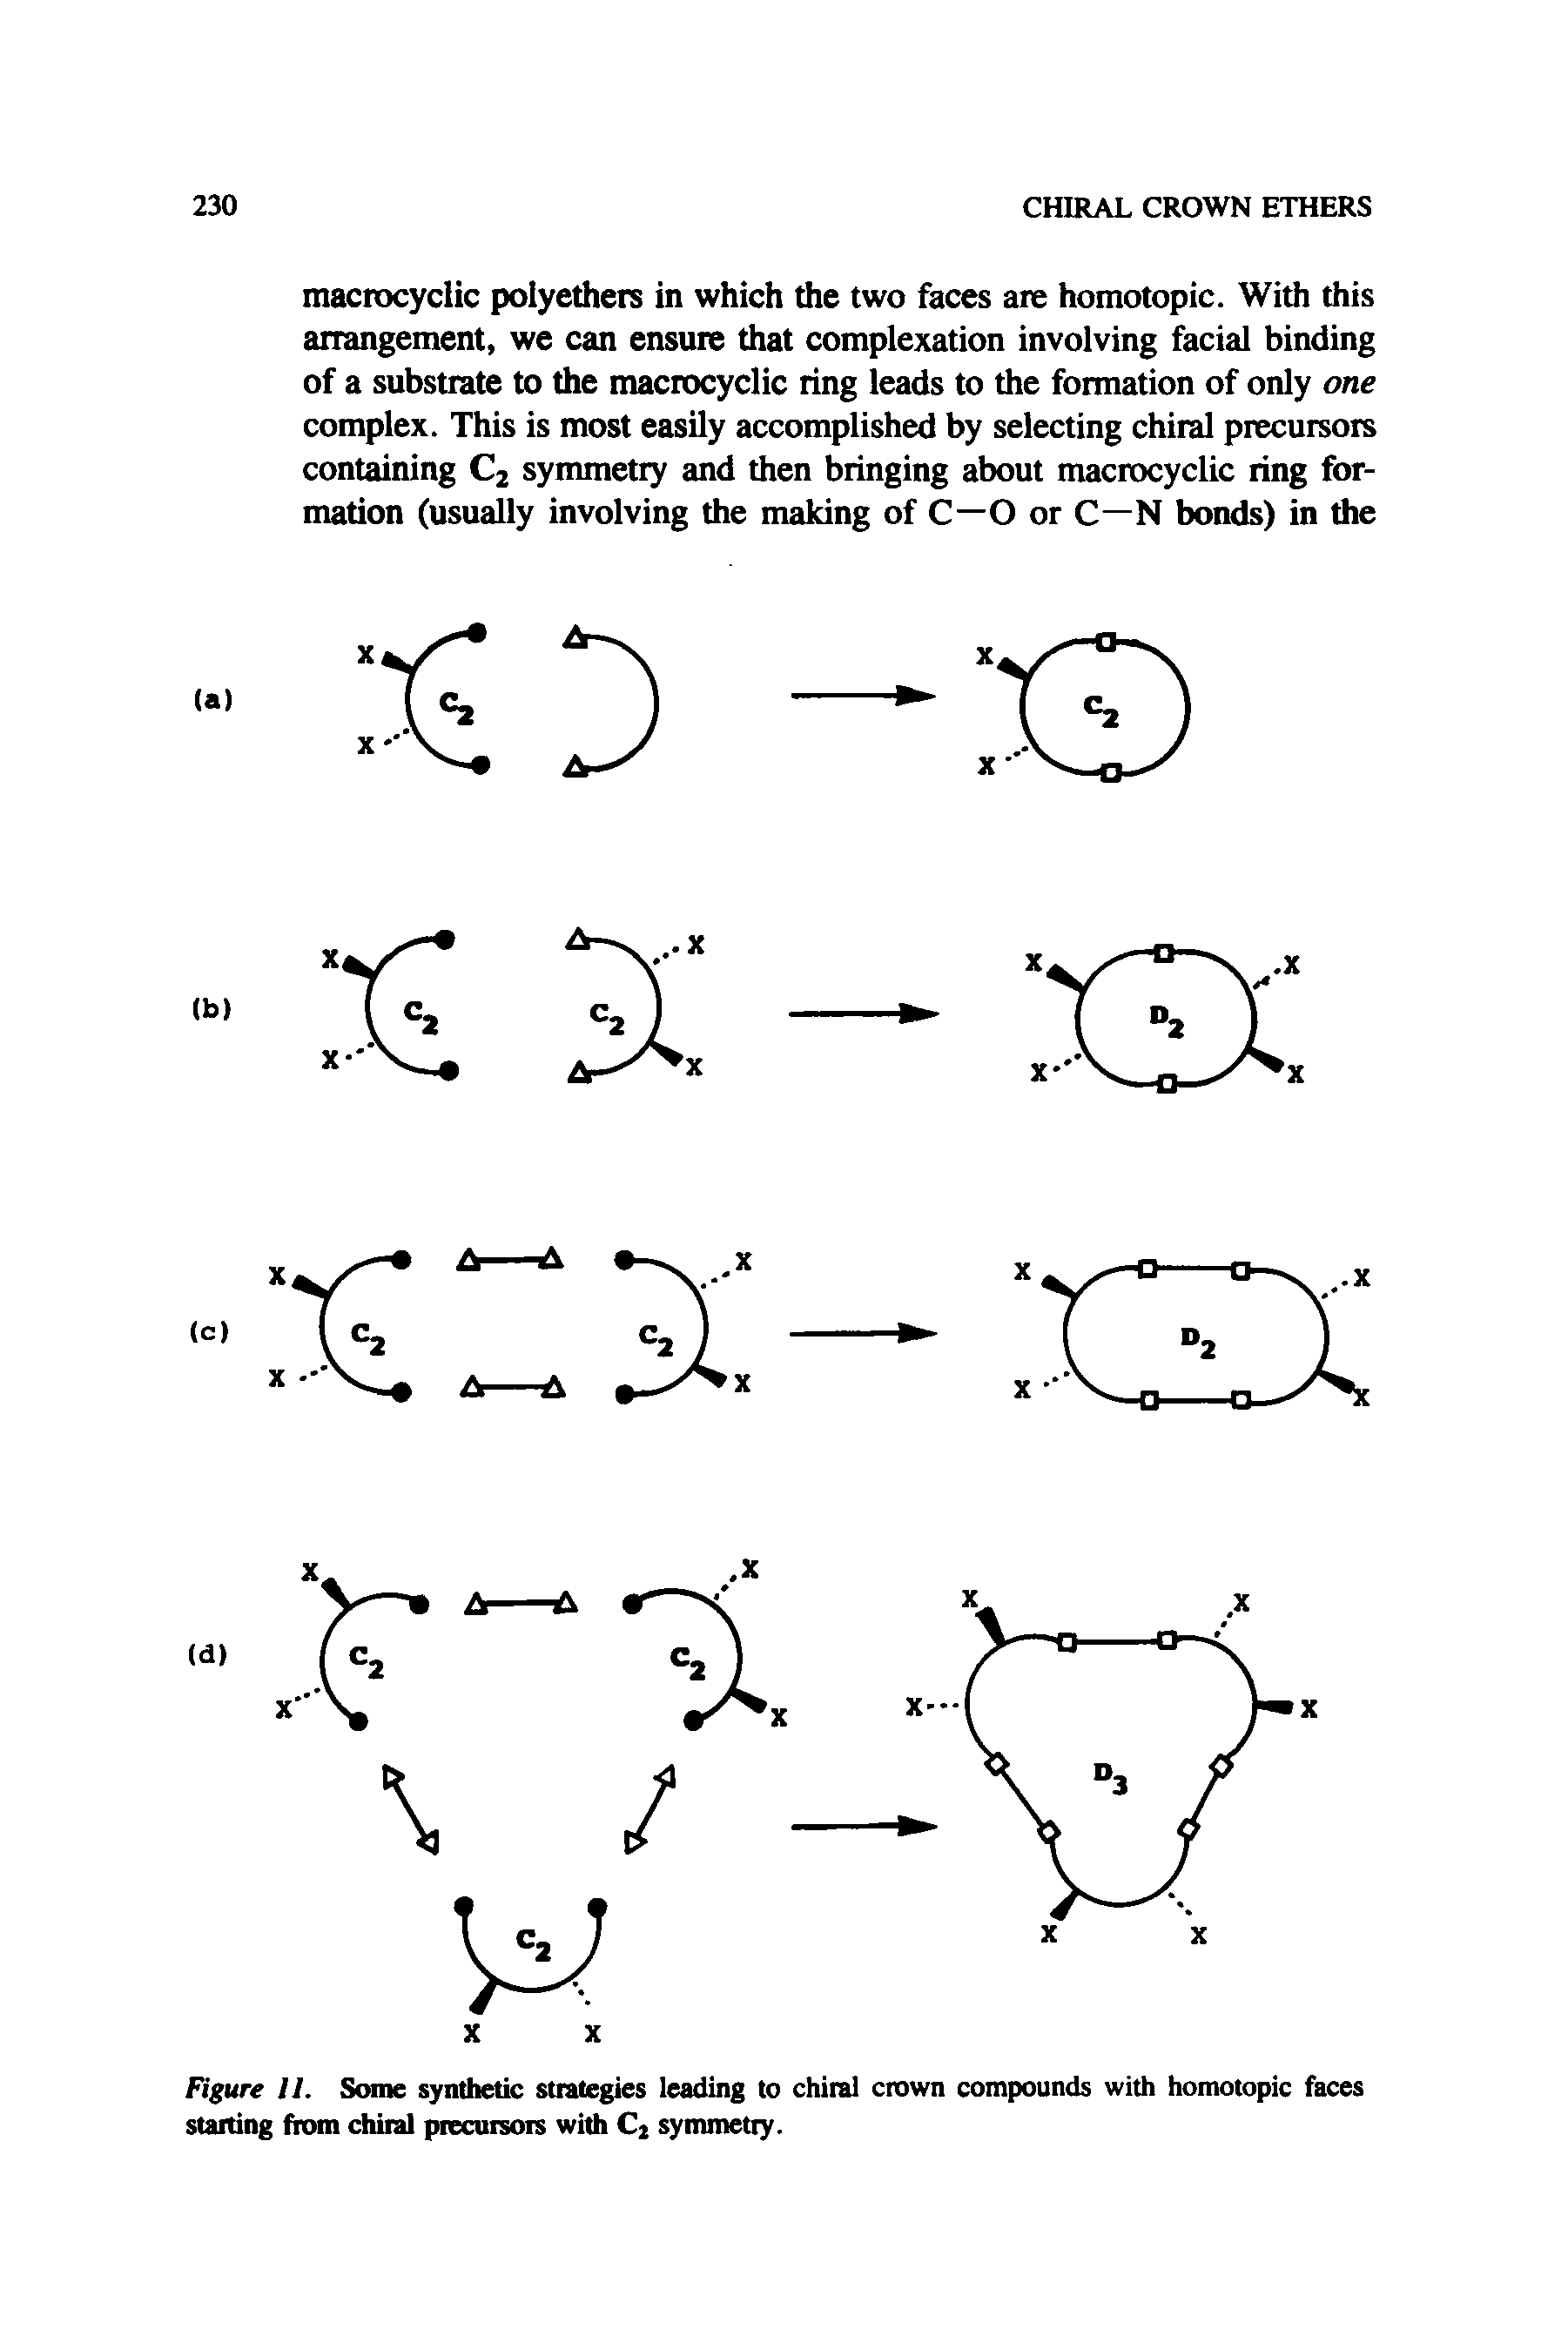 Figure II. Some synthetic strategies leading to chiral crown compounds with homotopic faces stalling from chiral piecuisois with C2 symmetry.